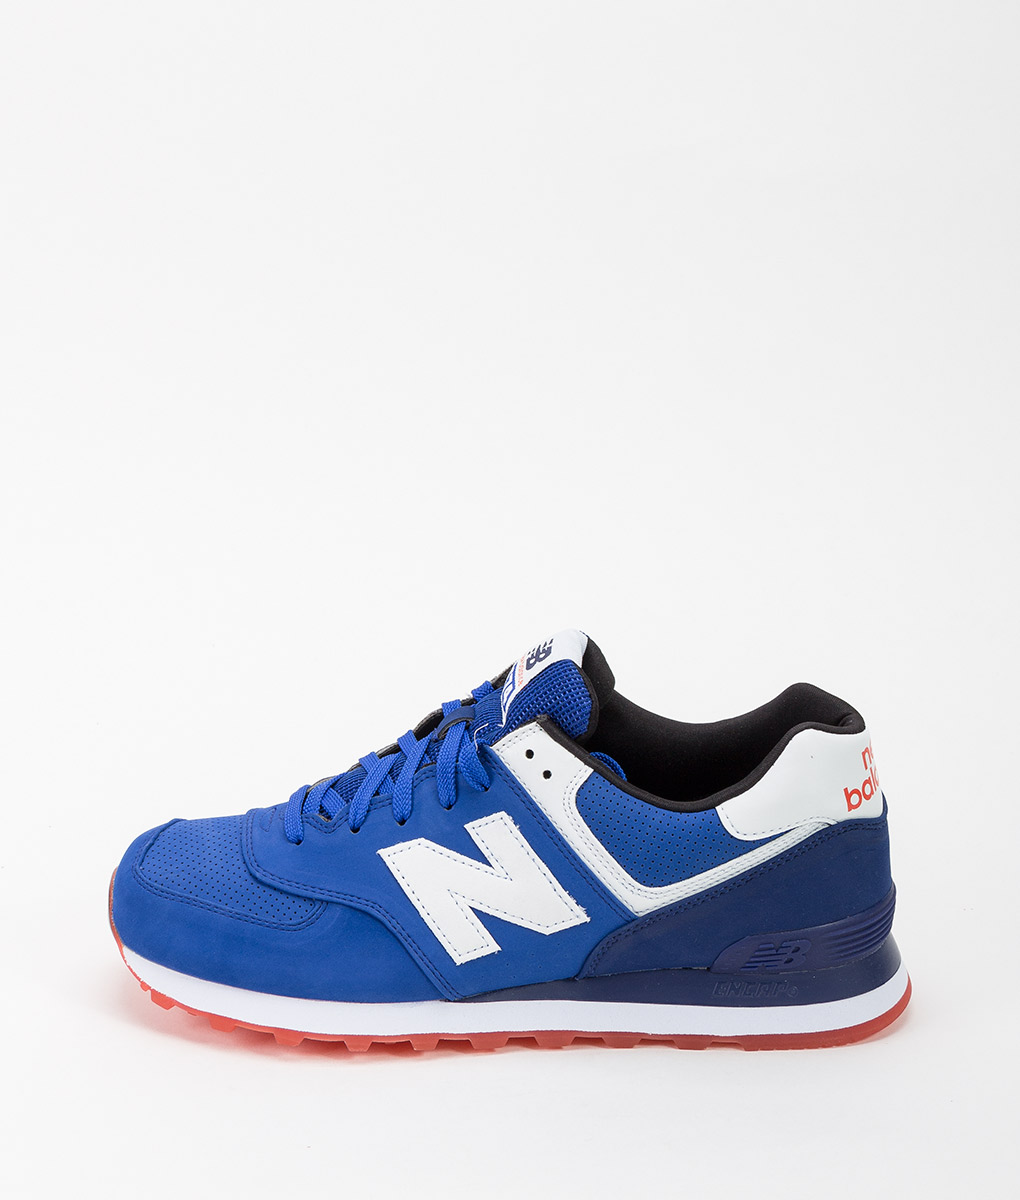 red white and blue new balance 99